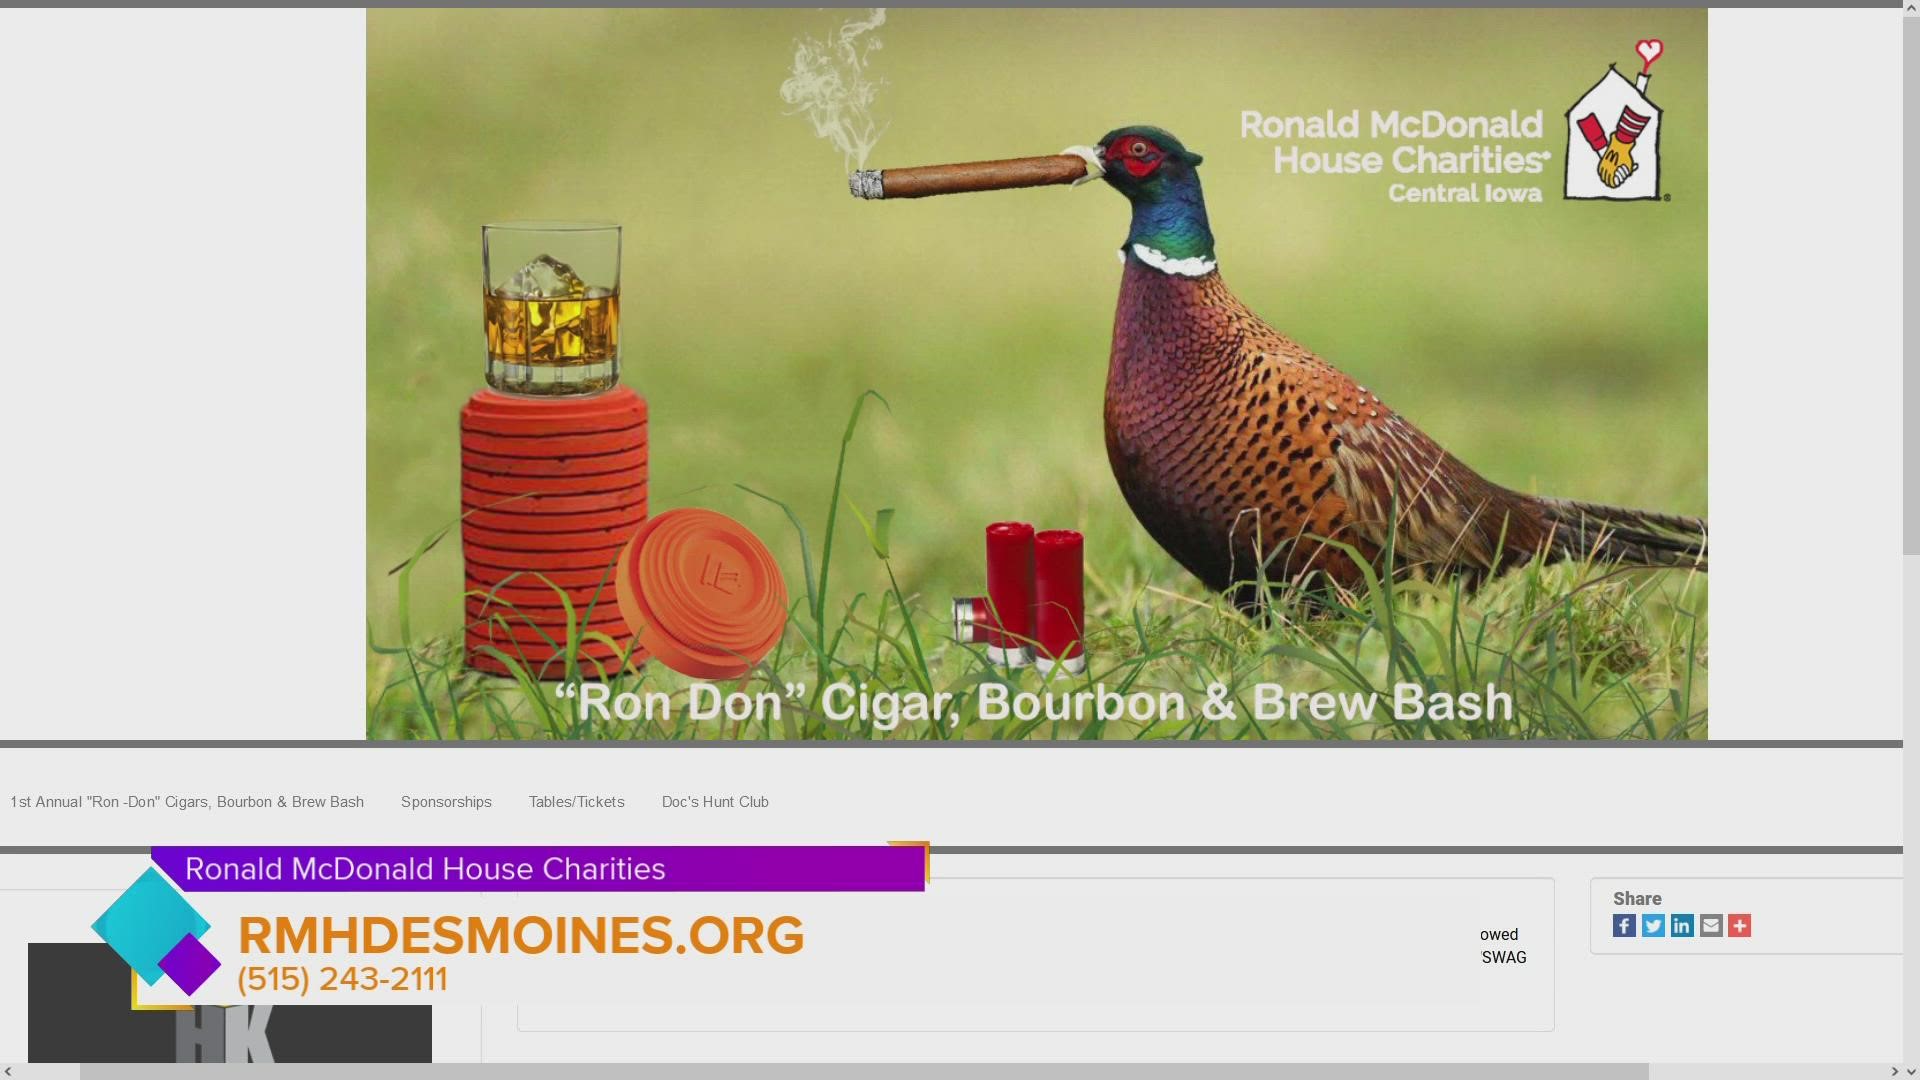 1st Annual "Ron Don" Cigar, Bourbon & Brew Bash is a fundraiser for the Ronald McDonald House Charities of Central Iowa happening Thursday September 29th in Adel, IA